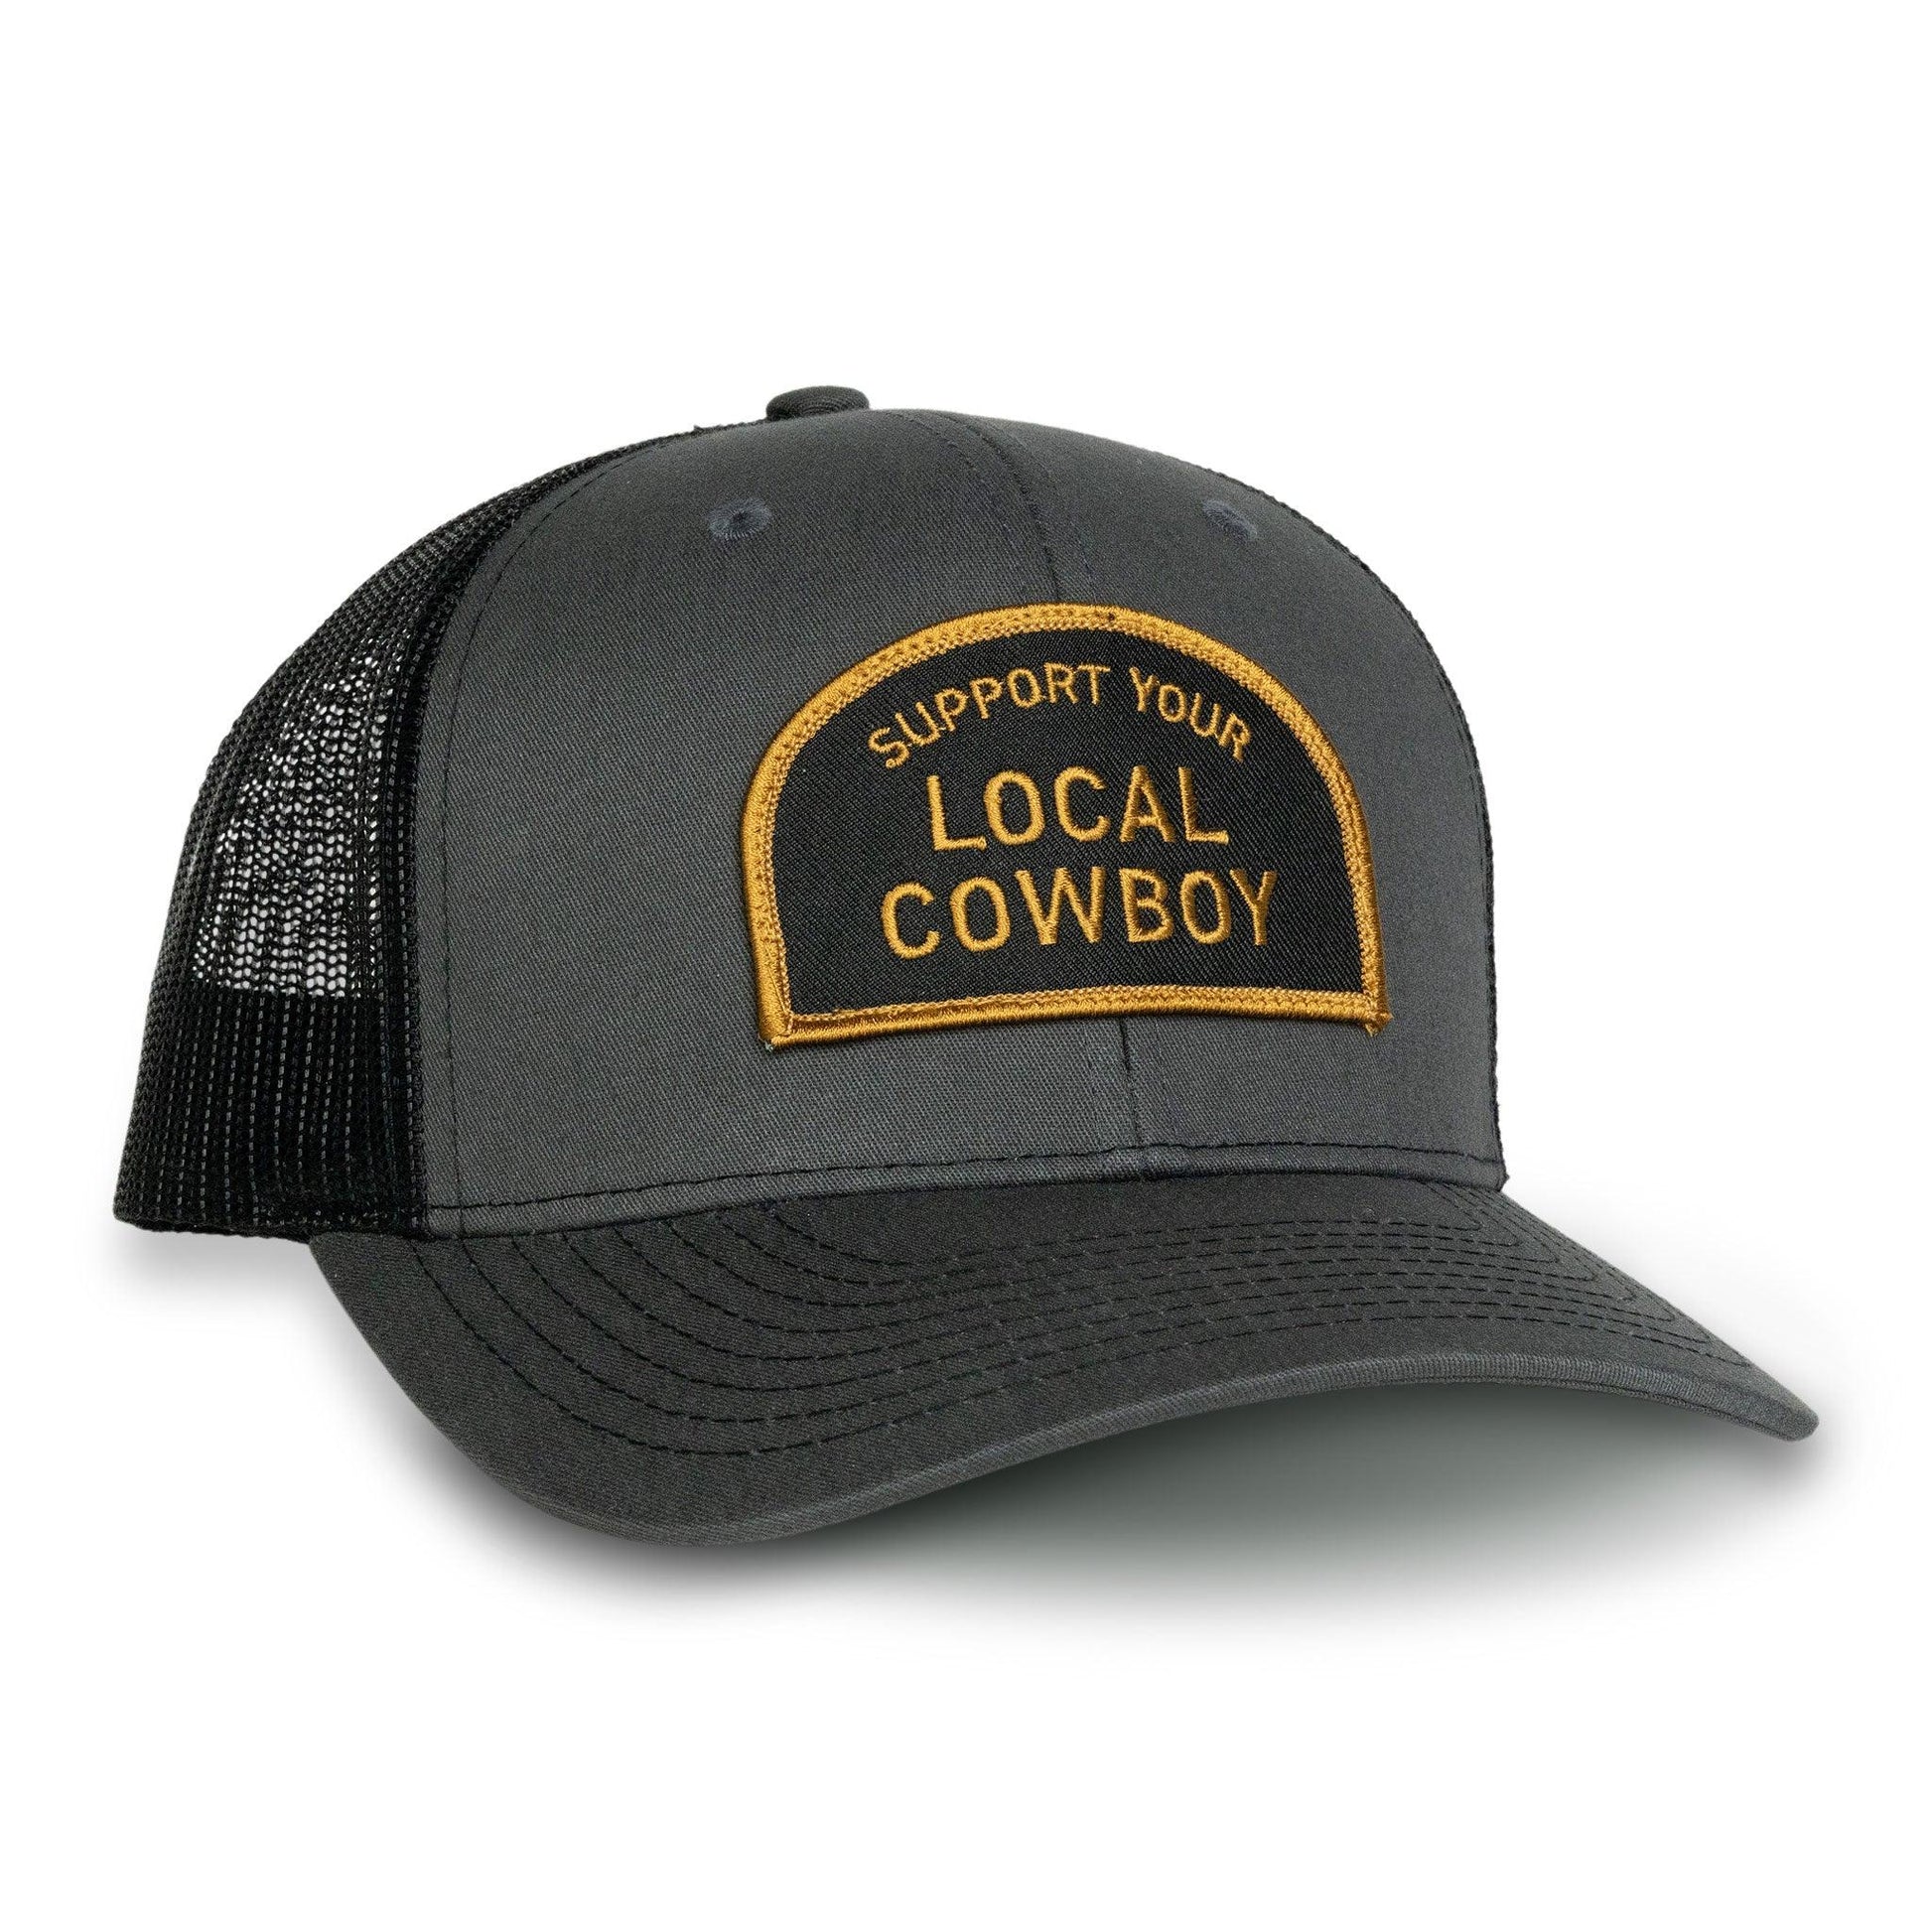 Cowboy Cool Support Your Local Cowboy Hat - Charcoal and Black